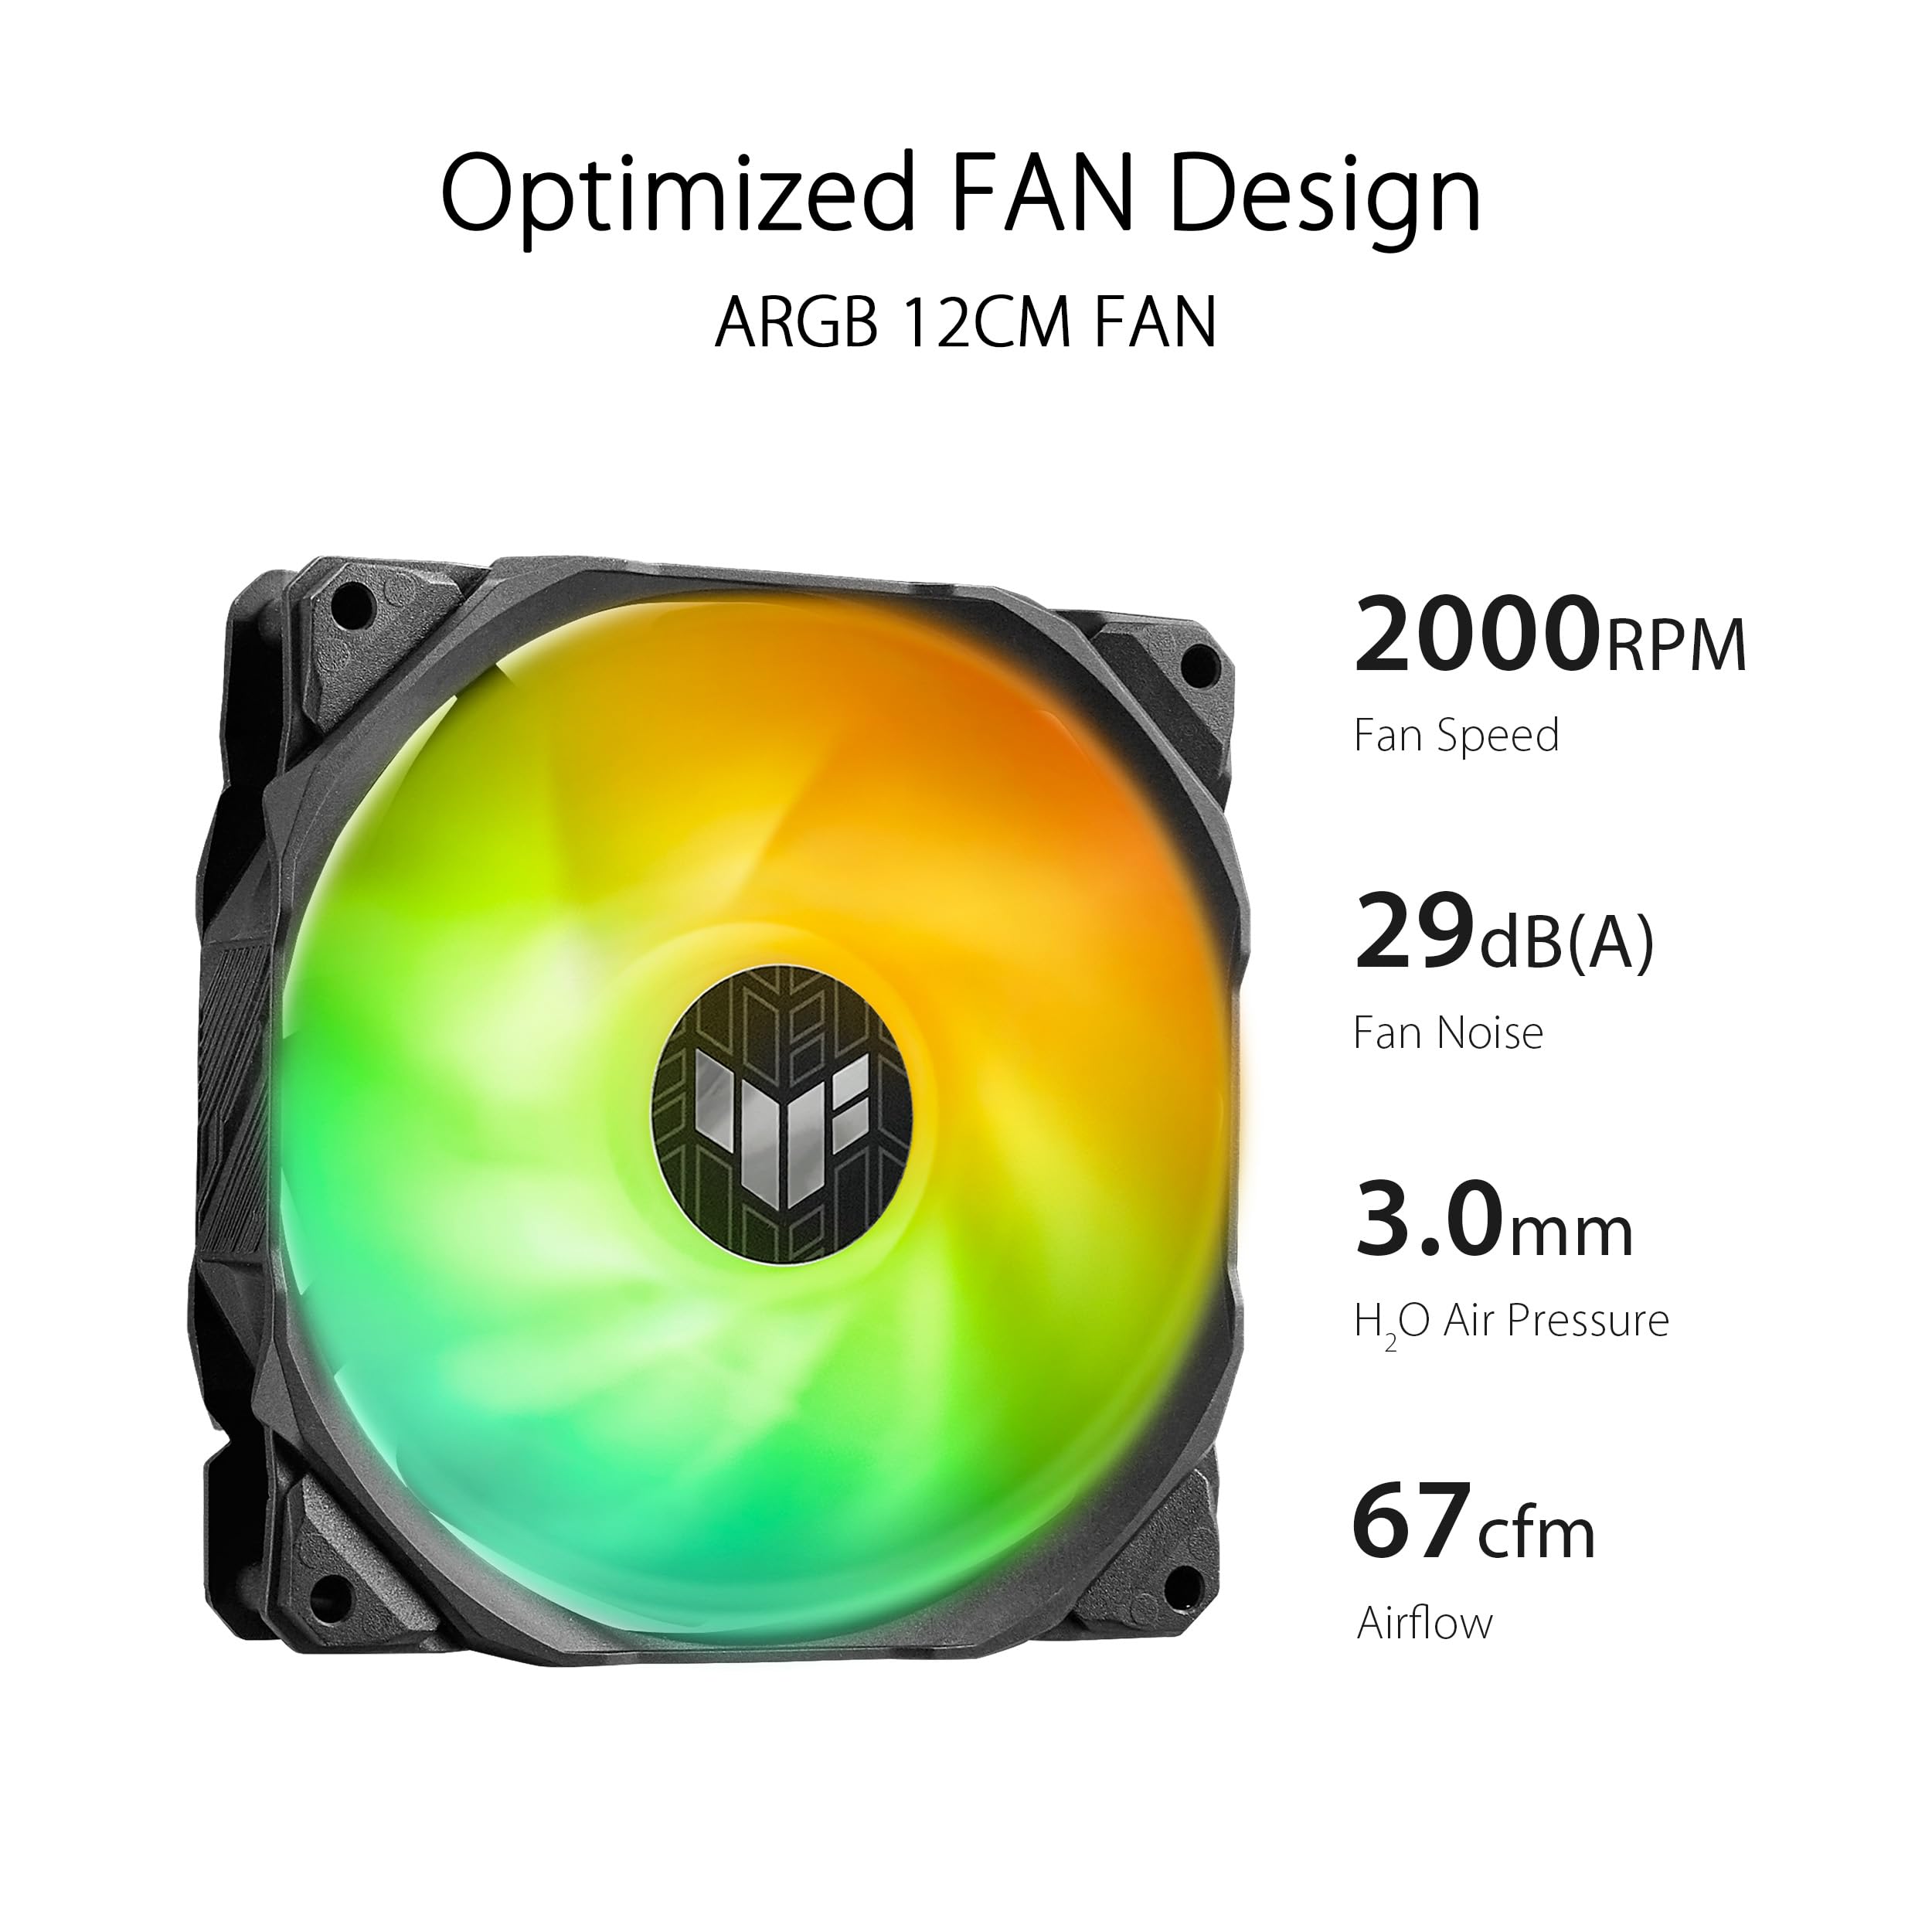 ASUS TUF Gaming LC II 360 ARGB All-in-One Liquid CPU Cooler with Aura Sync, 3X TUF Gaming 120mm ARGB Radiator Fans, Reinforced Tubing, and 6-Year Warranty;Widely Compatible with Latest Intel&AMD CPUs